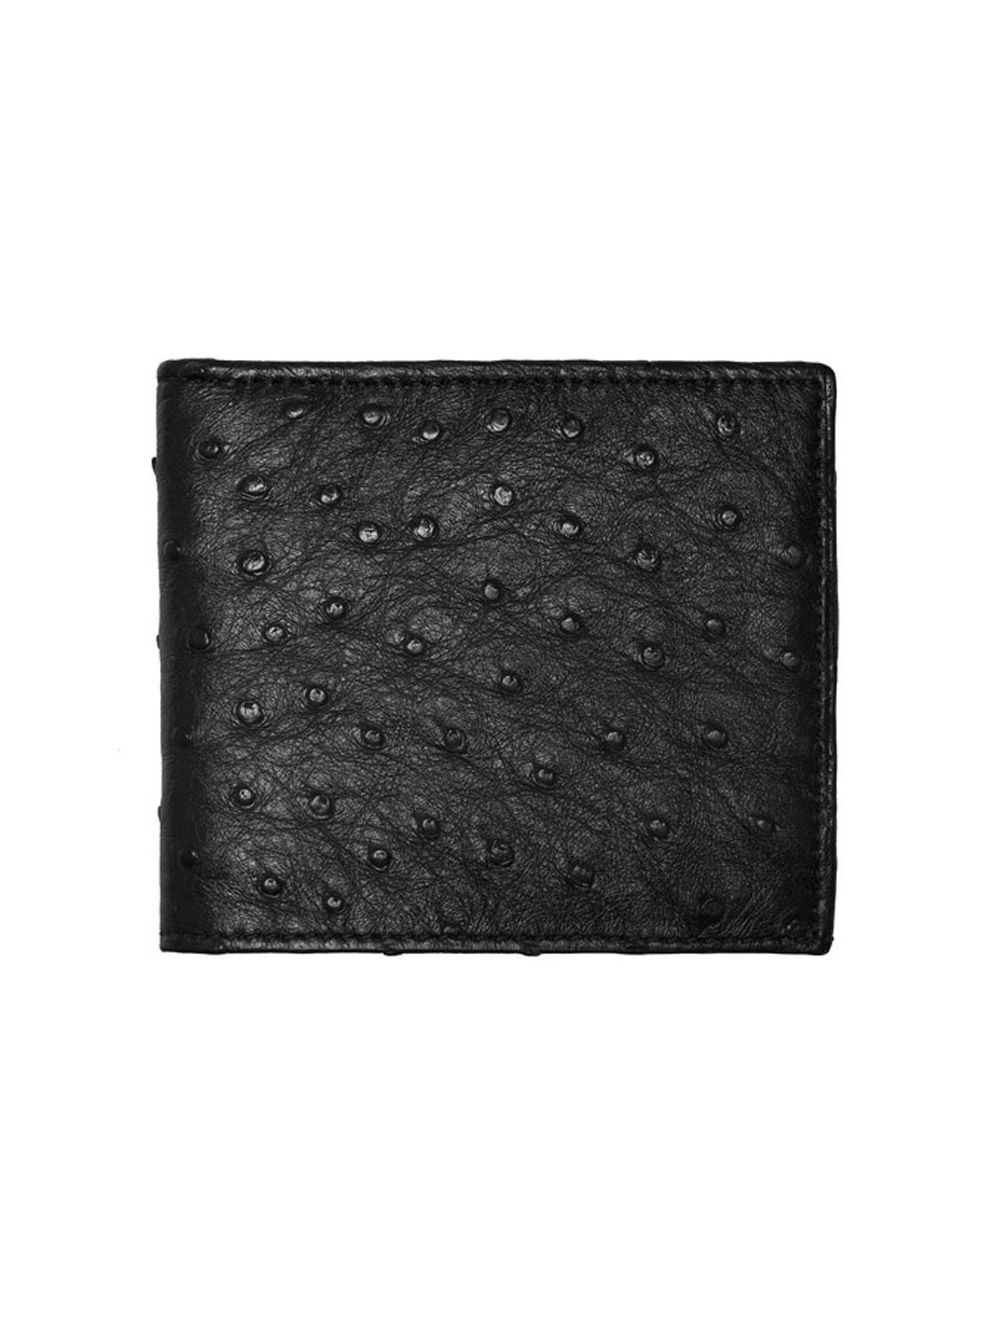 Lucchese Black Hipster Ostrich Wallets